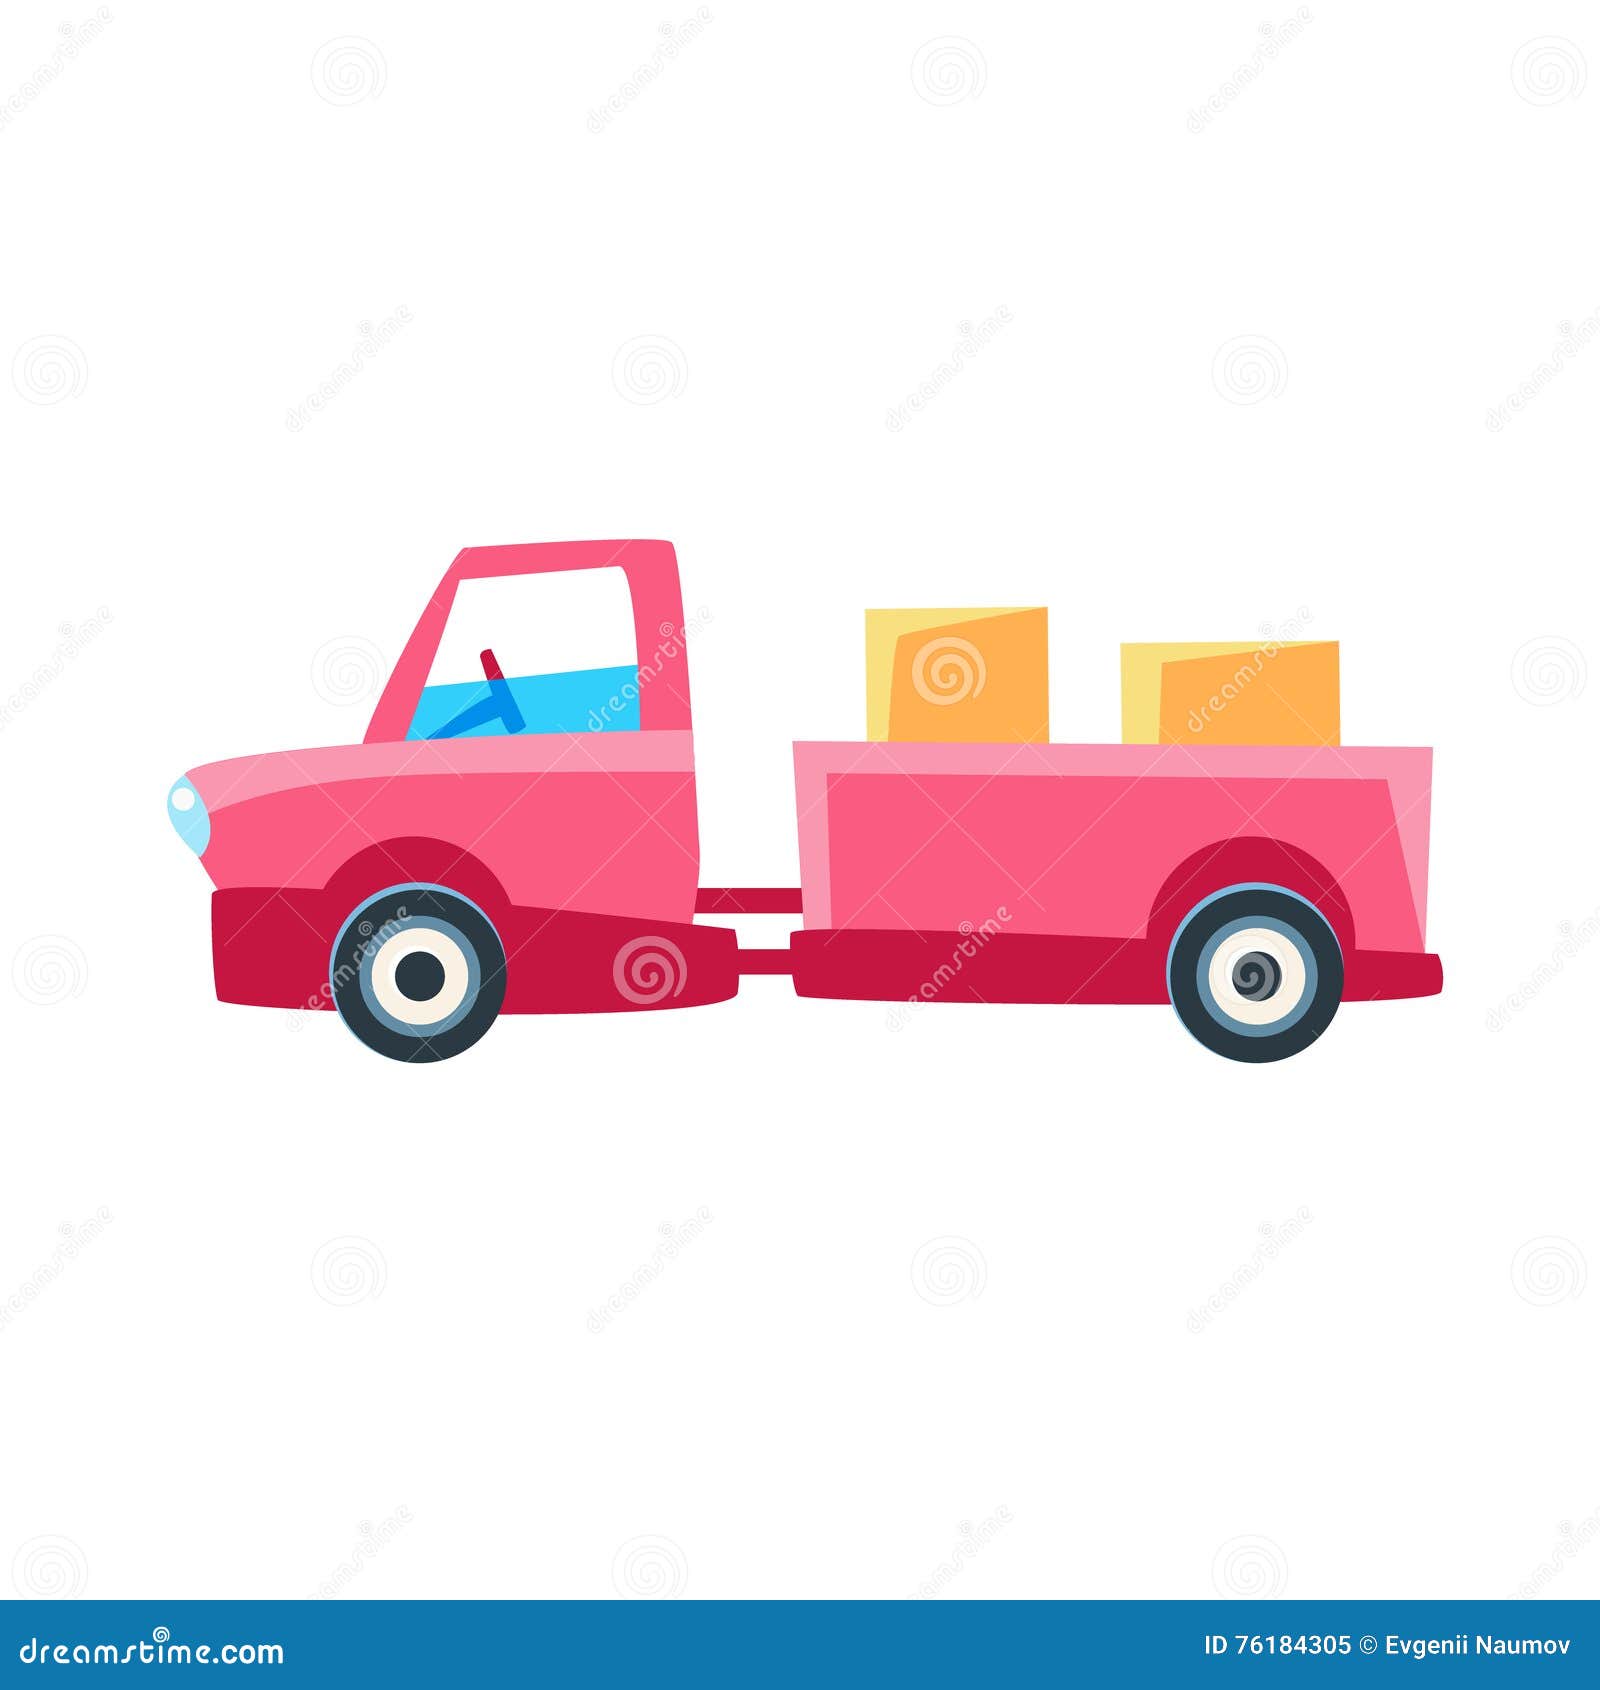 https://thumbs.dreamstime.com/z/rosa-lkw-mit-anh%C3%A4nger-toy-cute-car-icon-76184305.jpg